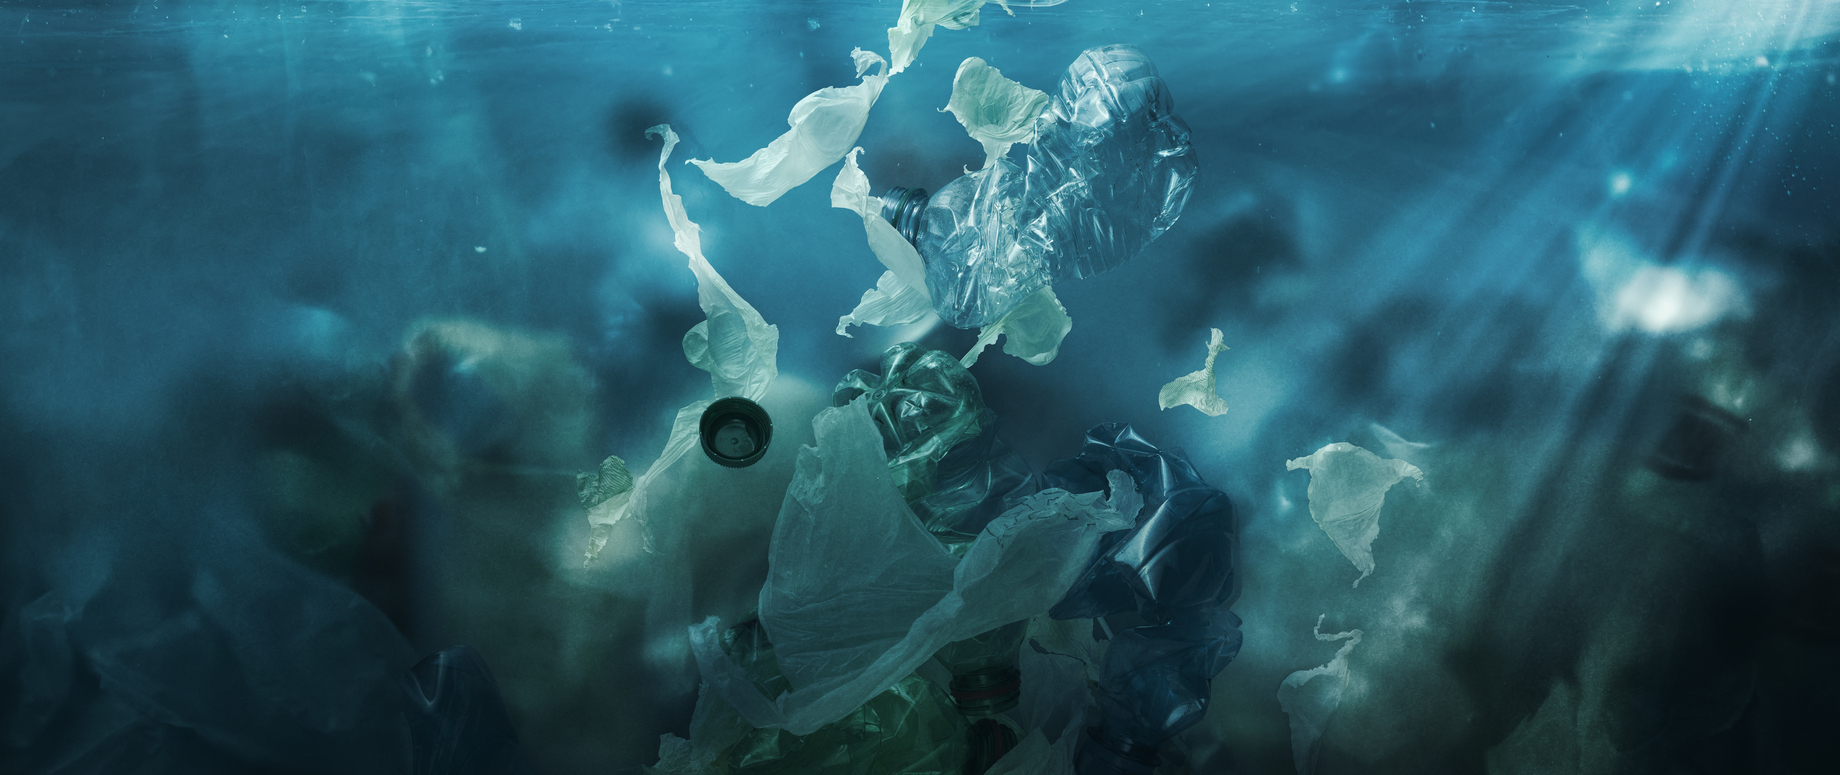 Toxic plastic waste floating underwater in the ocean, water pollution and environmental damage